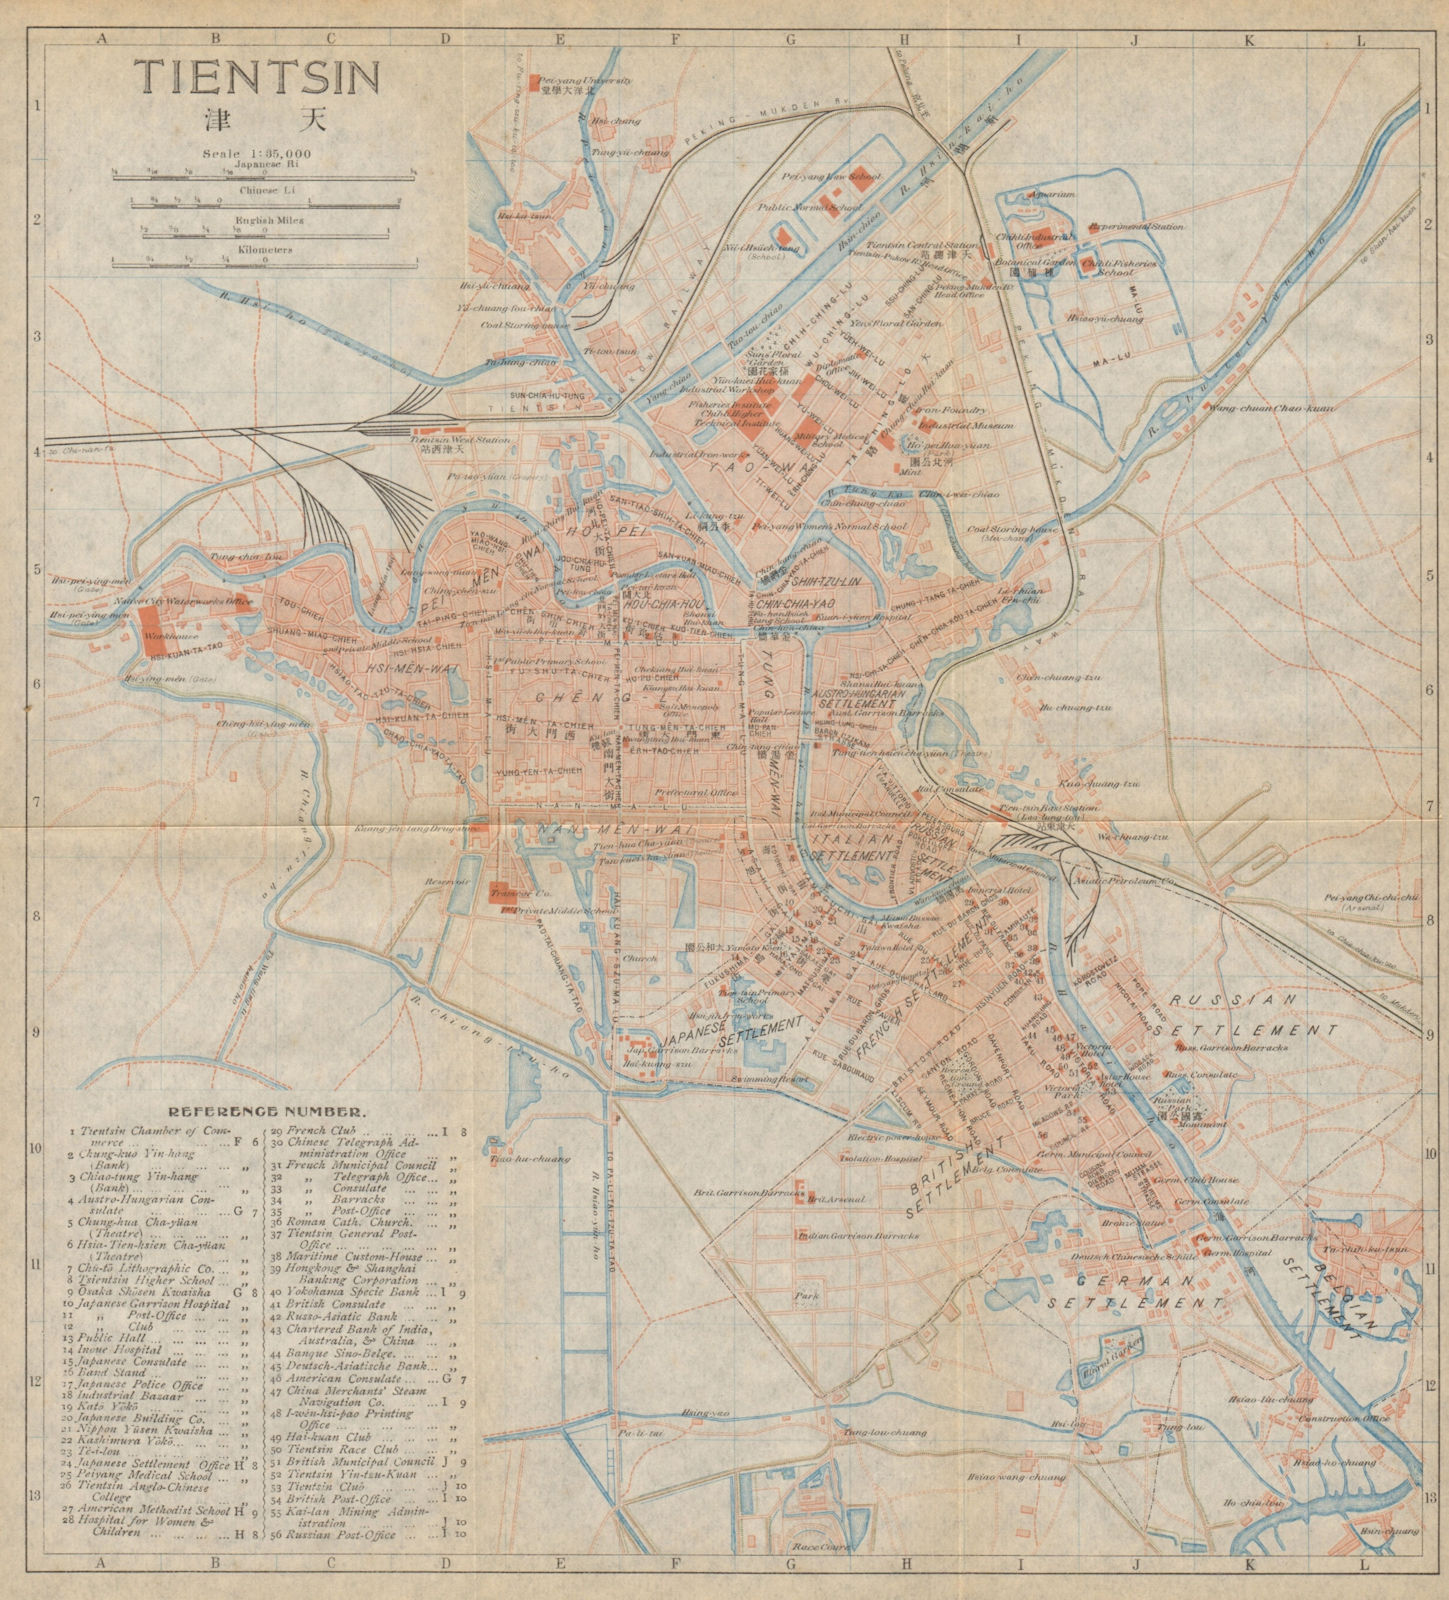 'Tientsin'. Tianjin antique town city plan. China 1915 old map chart